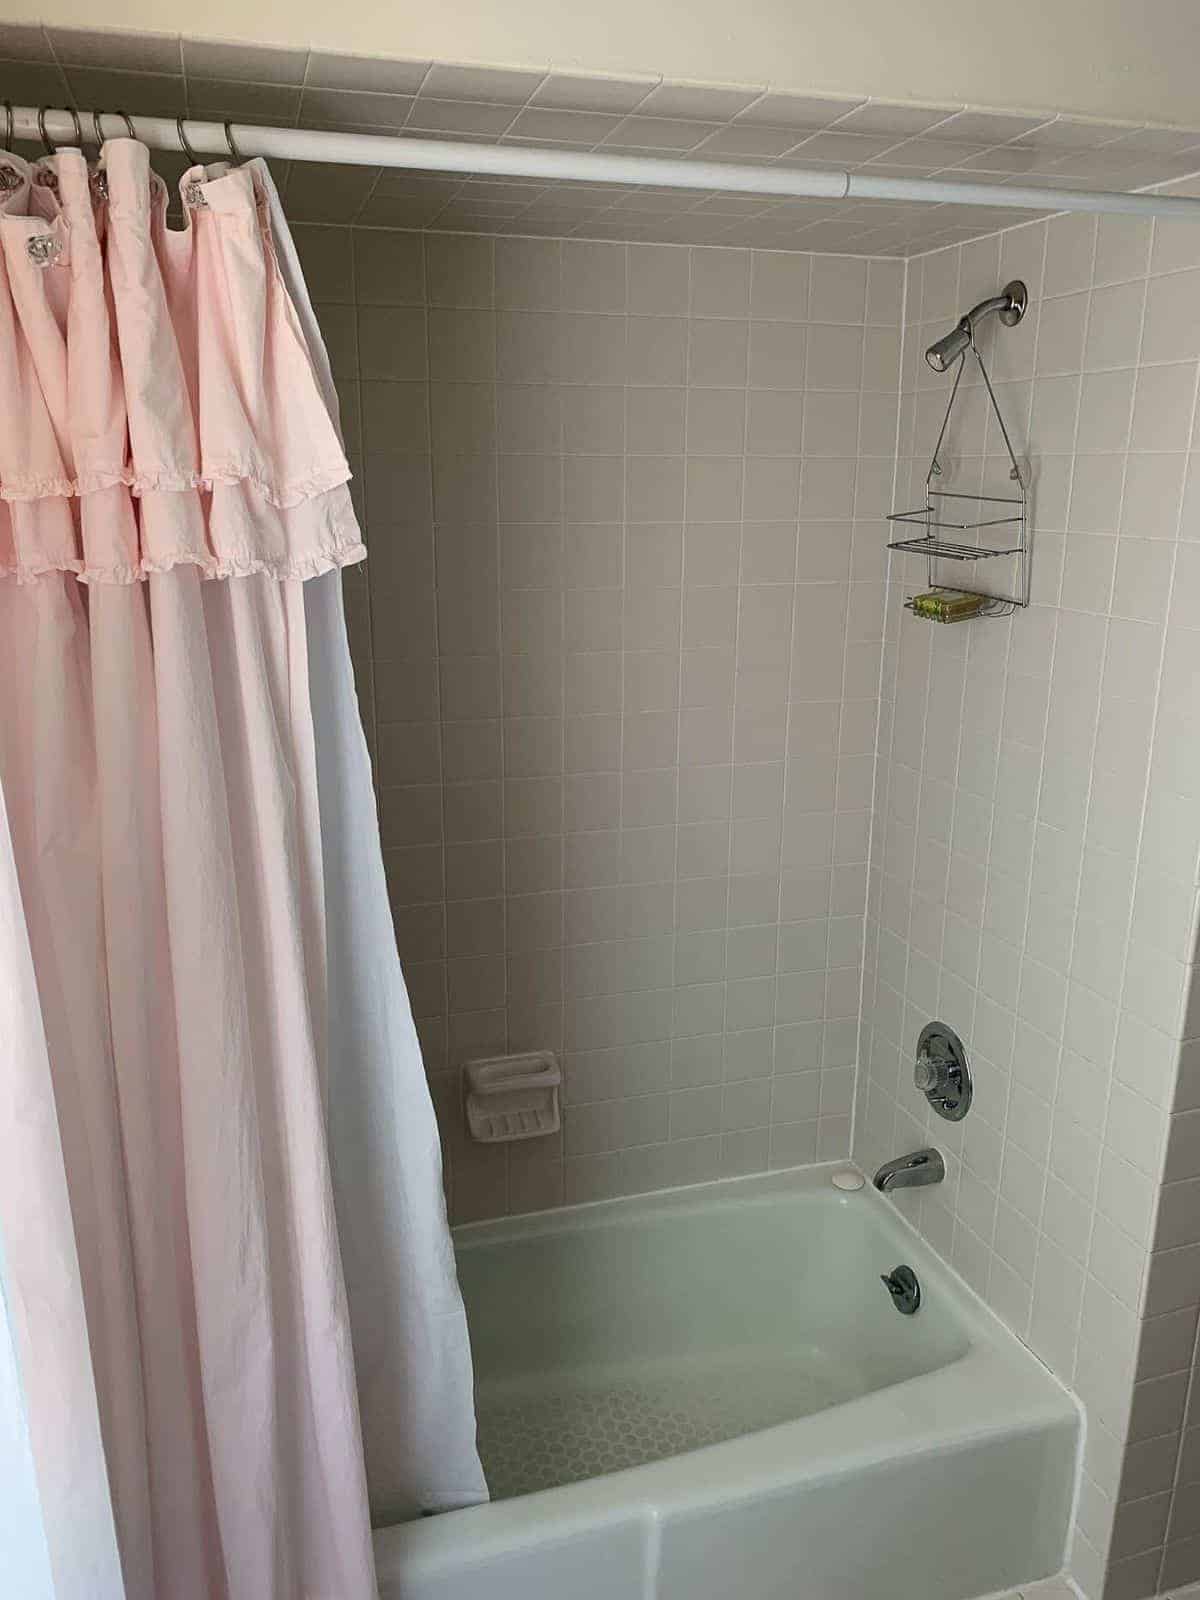 Dark and dated shower with low ceiling. #beforeandafter